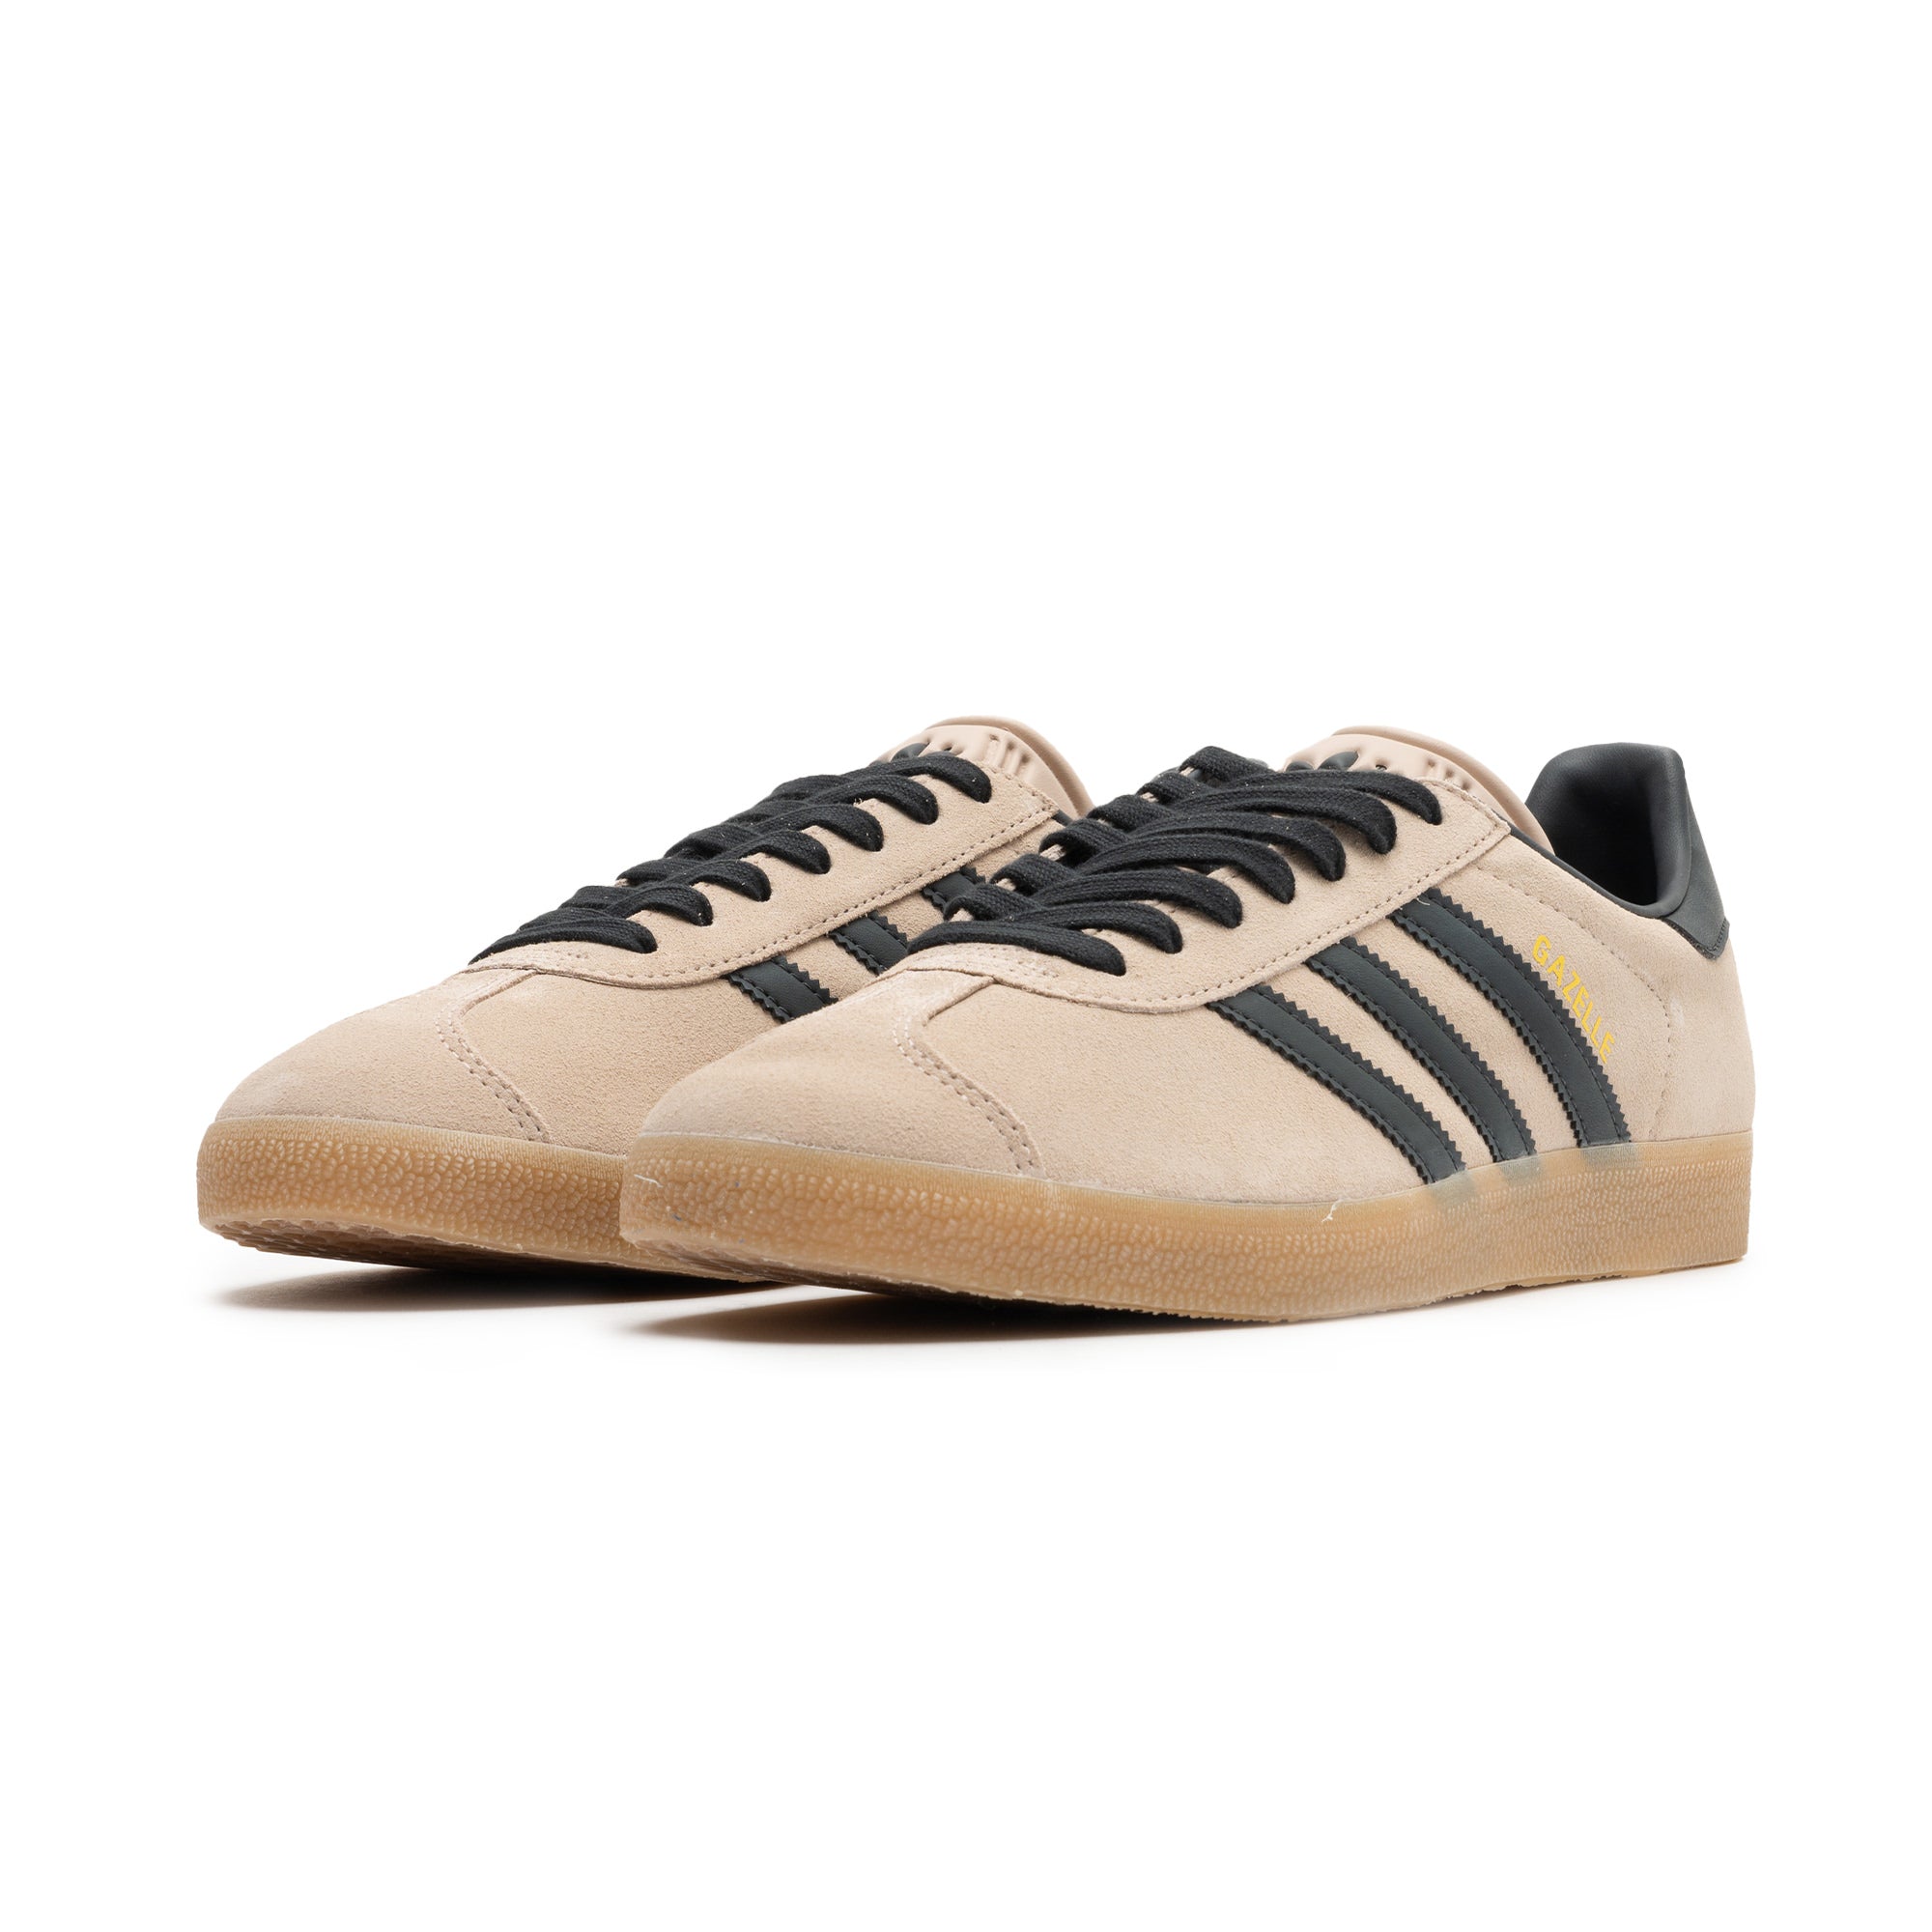 Norse Projects Releasing Their Own adidas Torsion TRDC